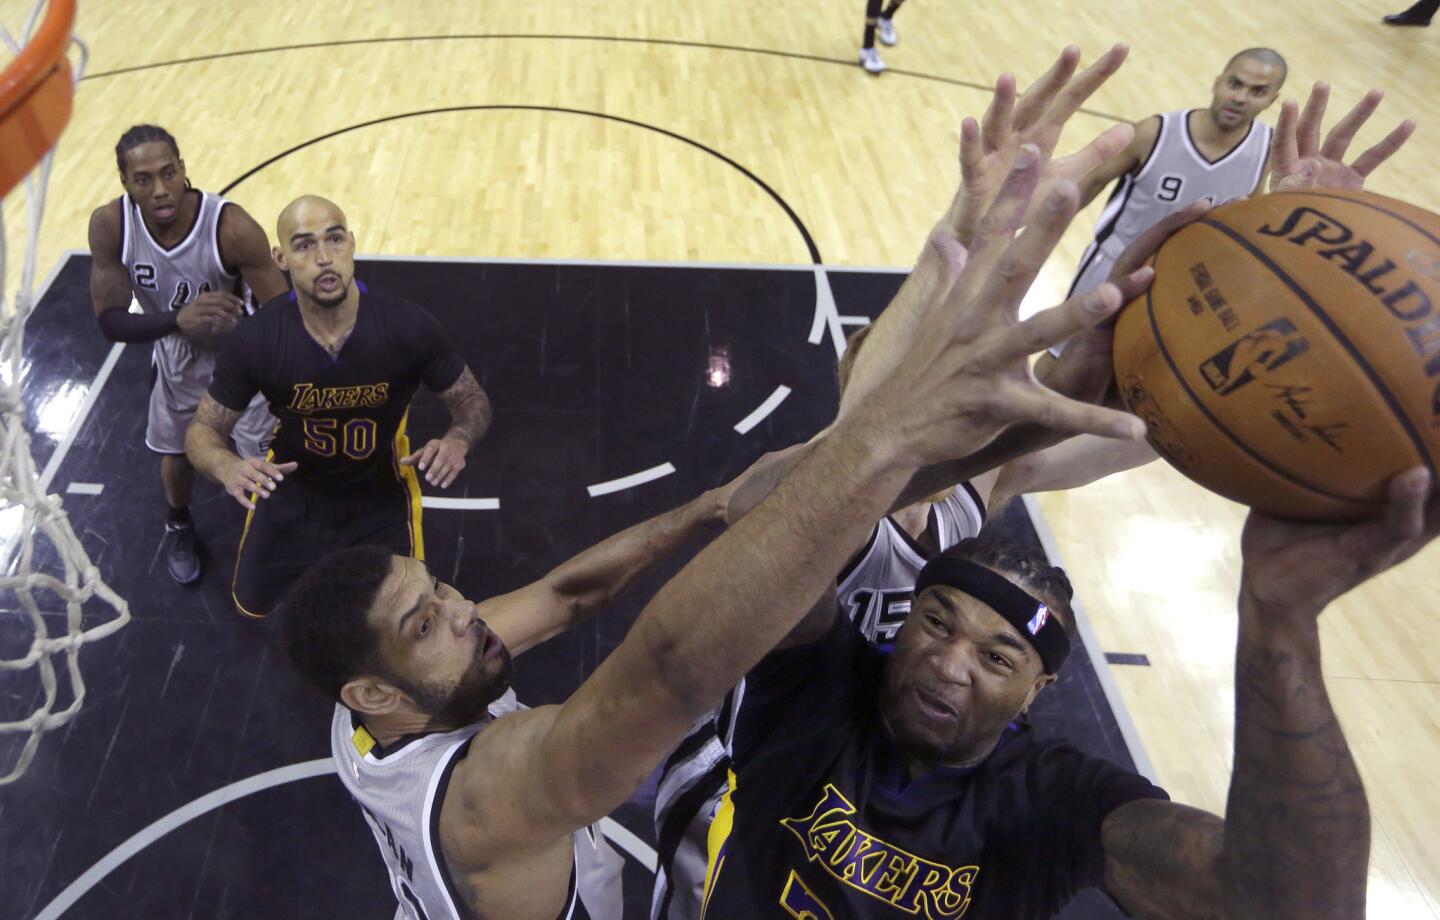 Lakers center Jordan Hill tries to power his way to the basket against Spurs forward Tim Duncan in the second half.